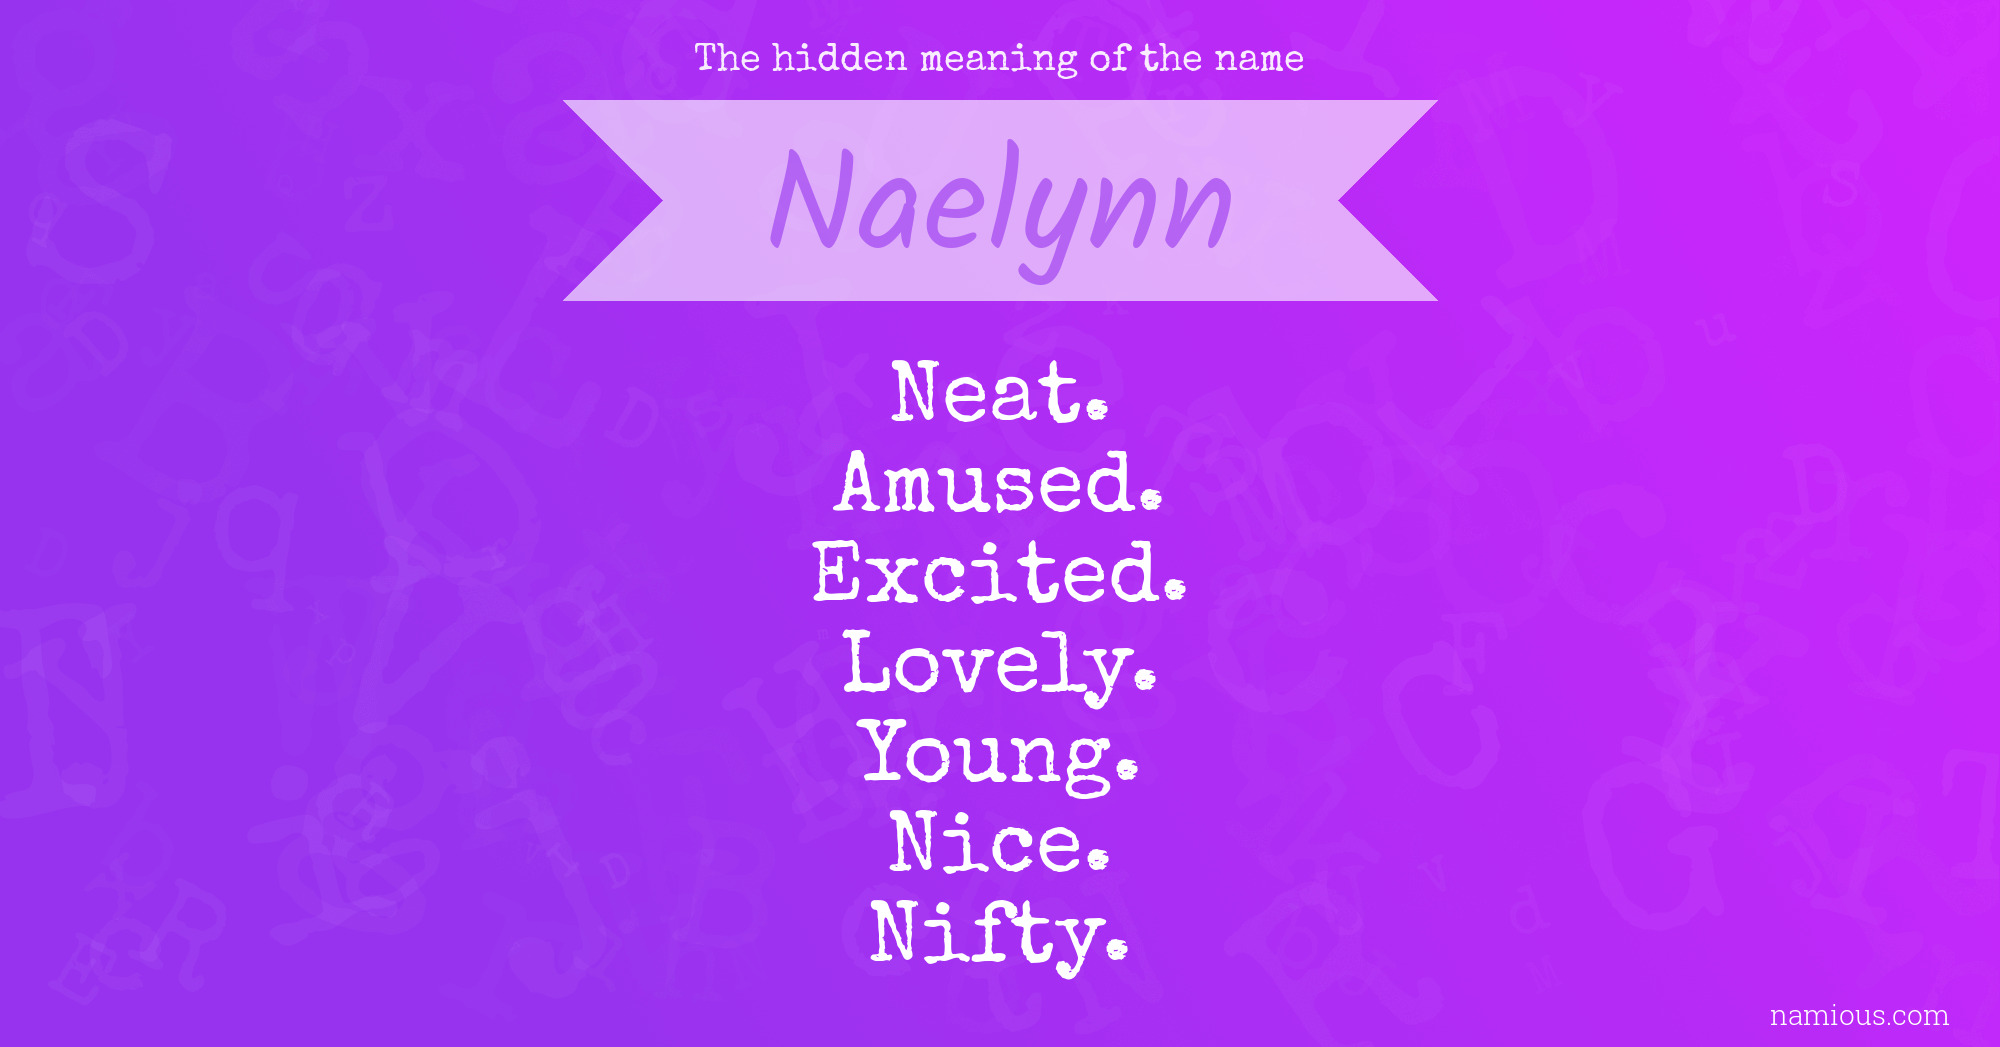 The hidden meaning of the name Naelynn